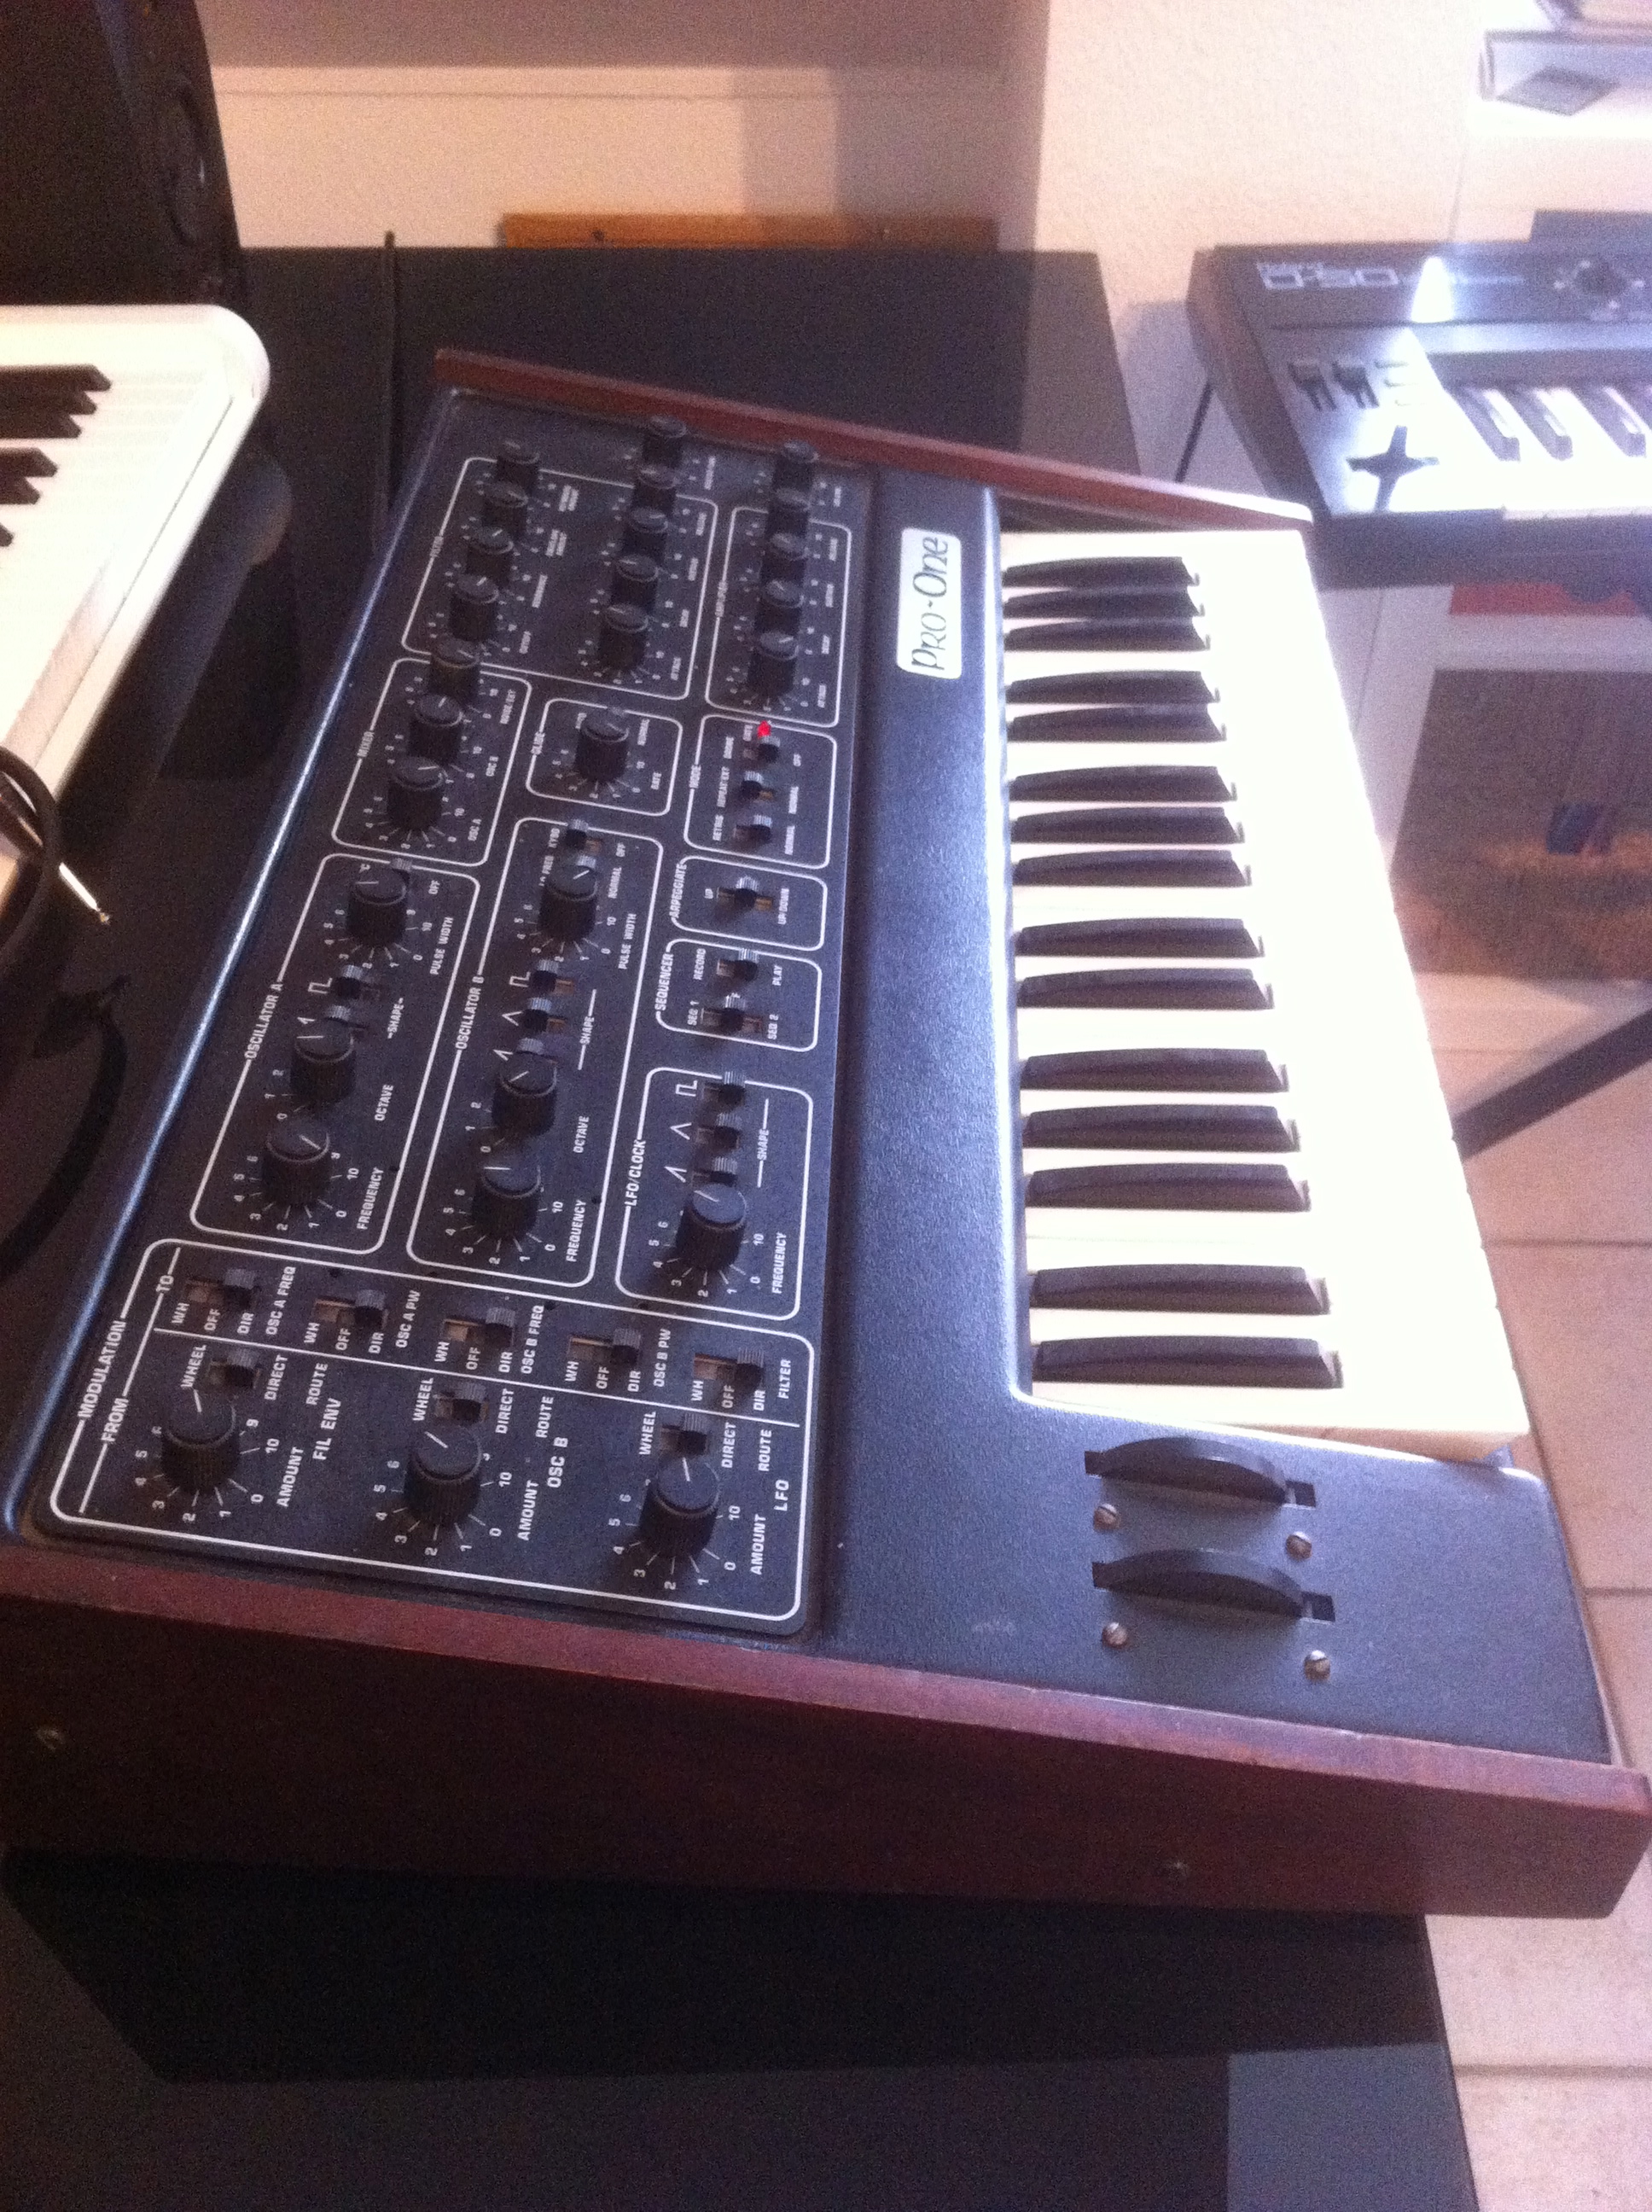 sequential circuits pro one with mtg